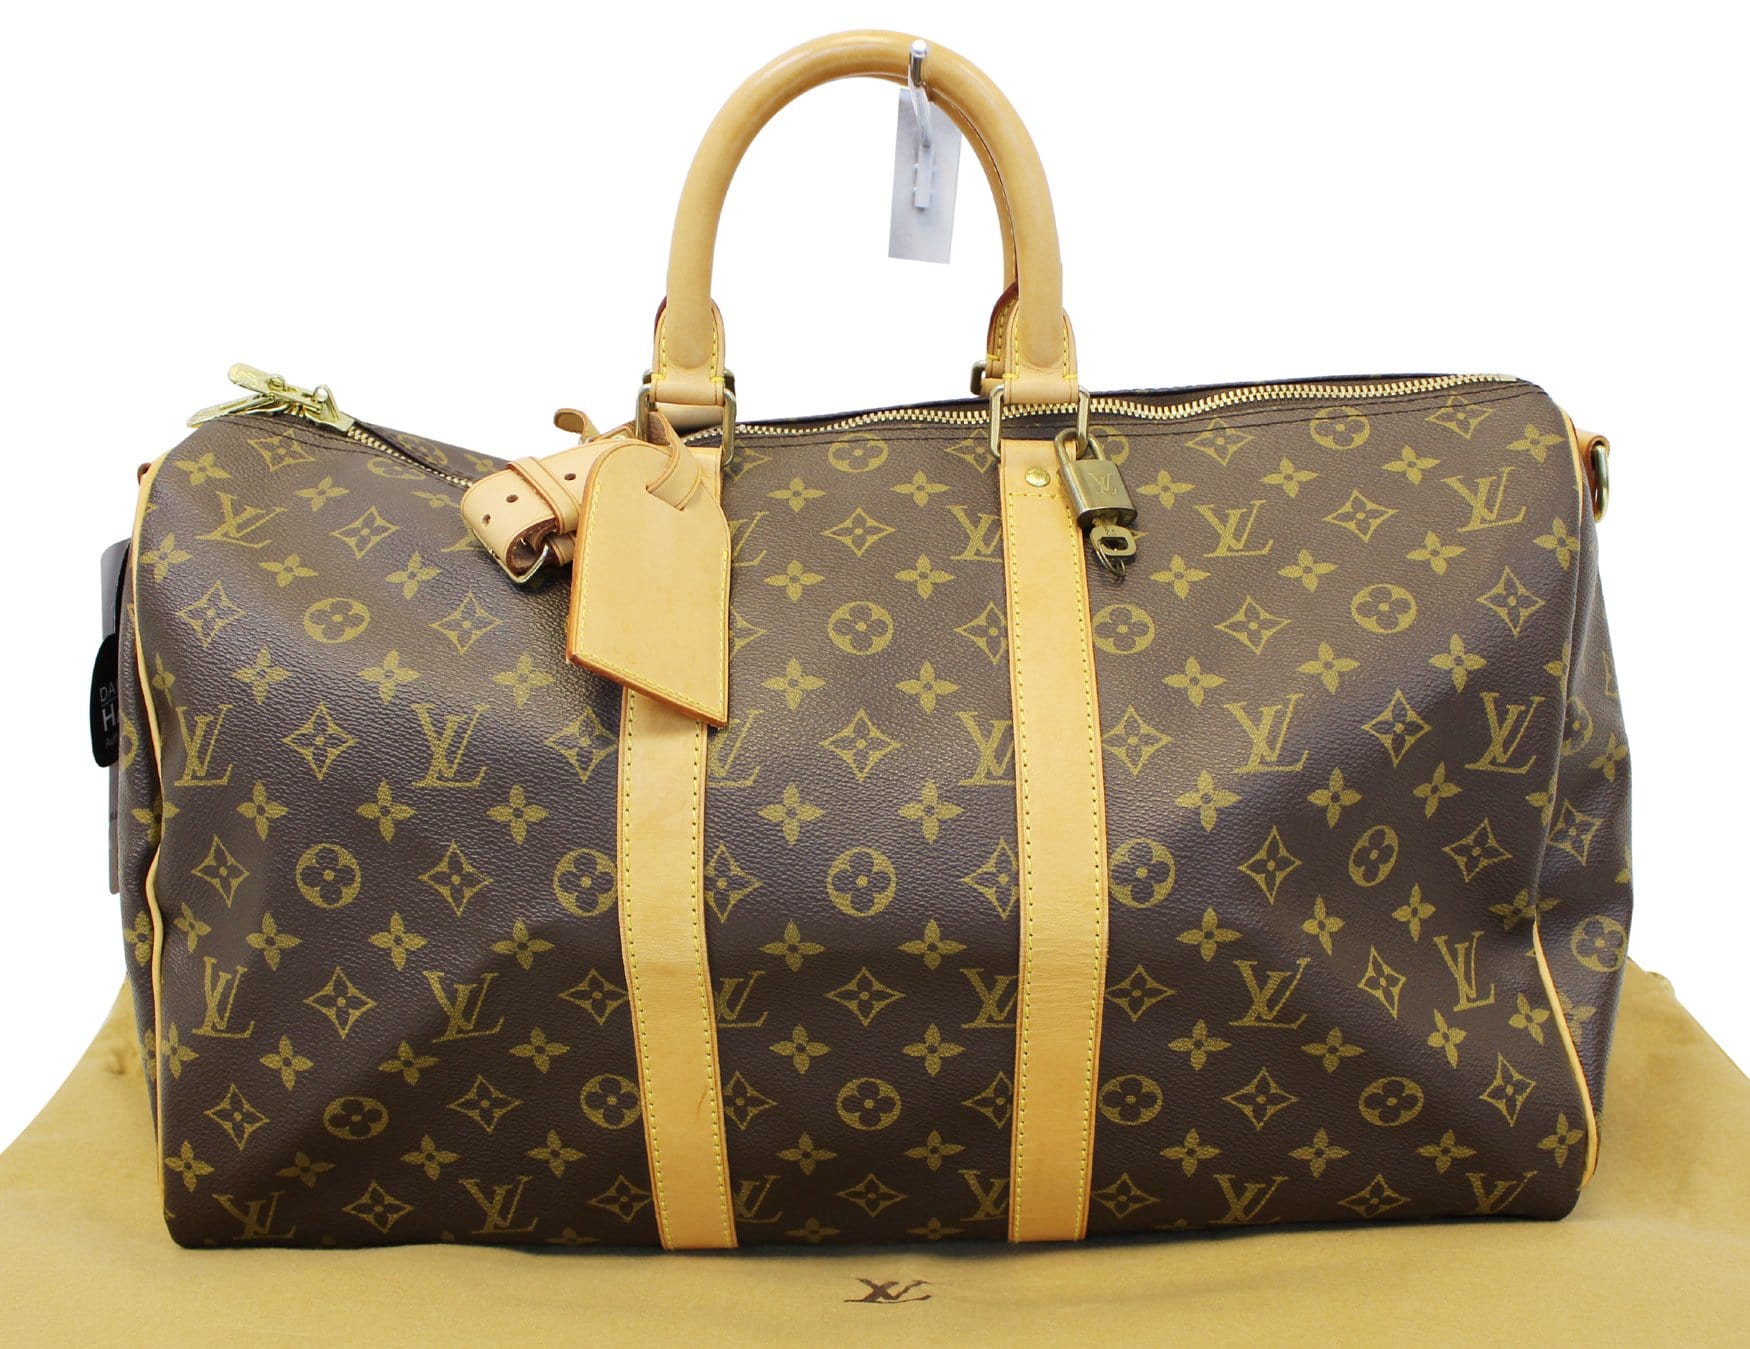 Louis Vuitton Monogram Keepall Bandouliere 45 Duffle Bag with Strap 1122lv11